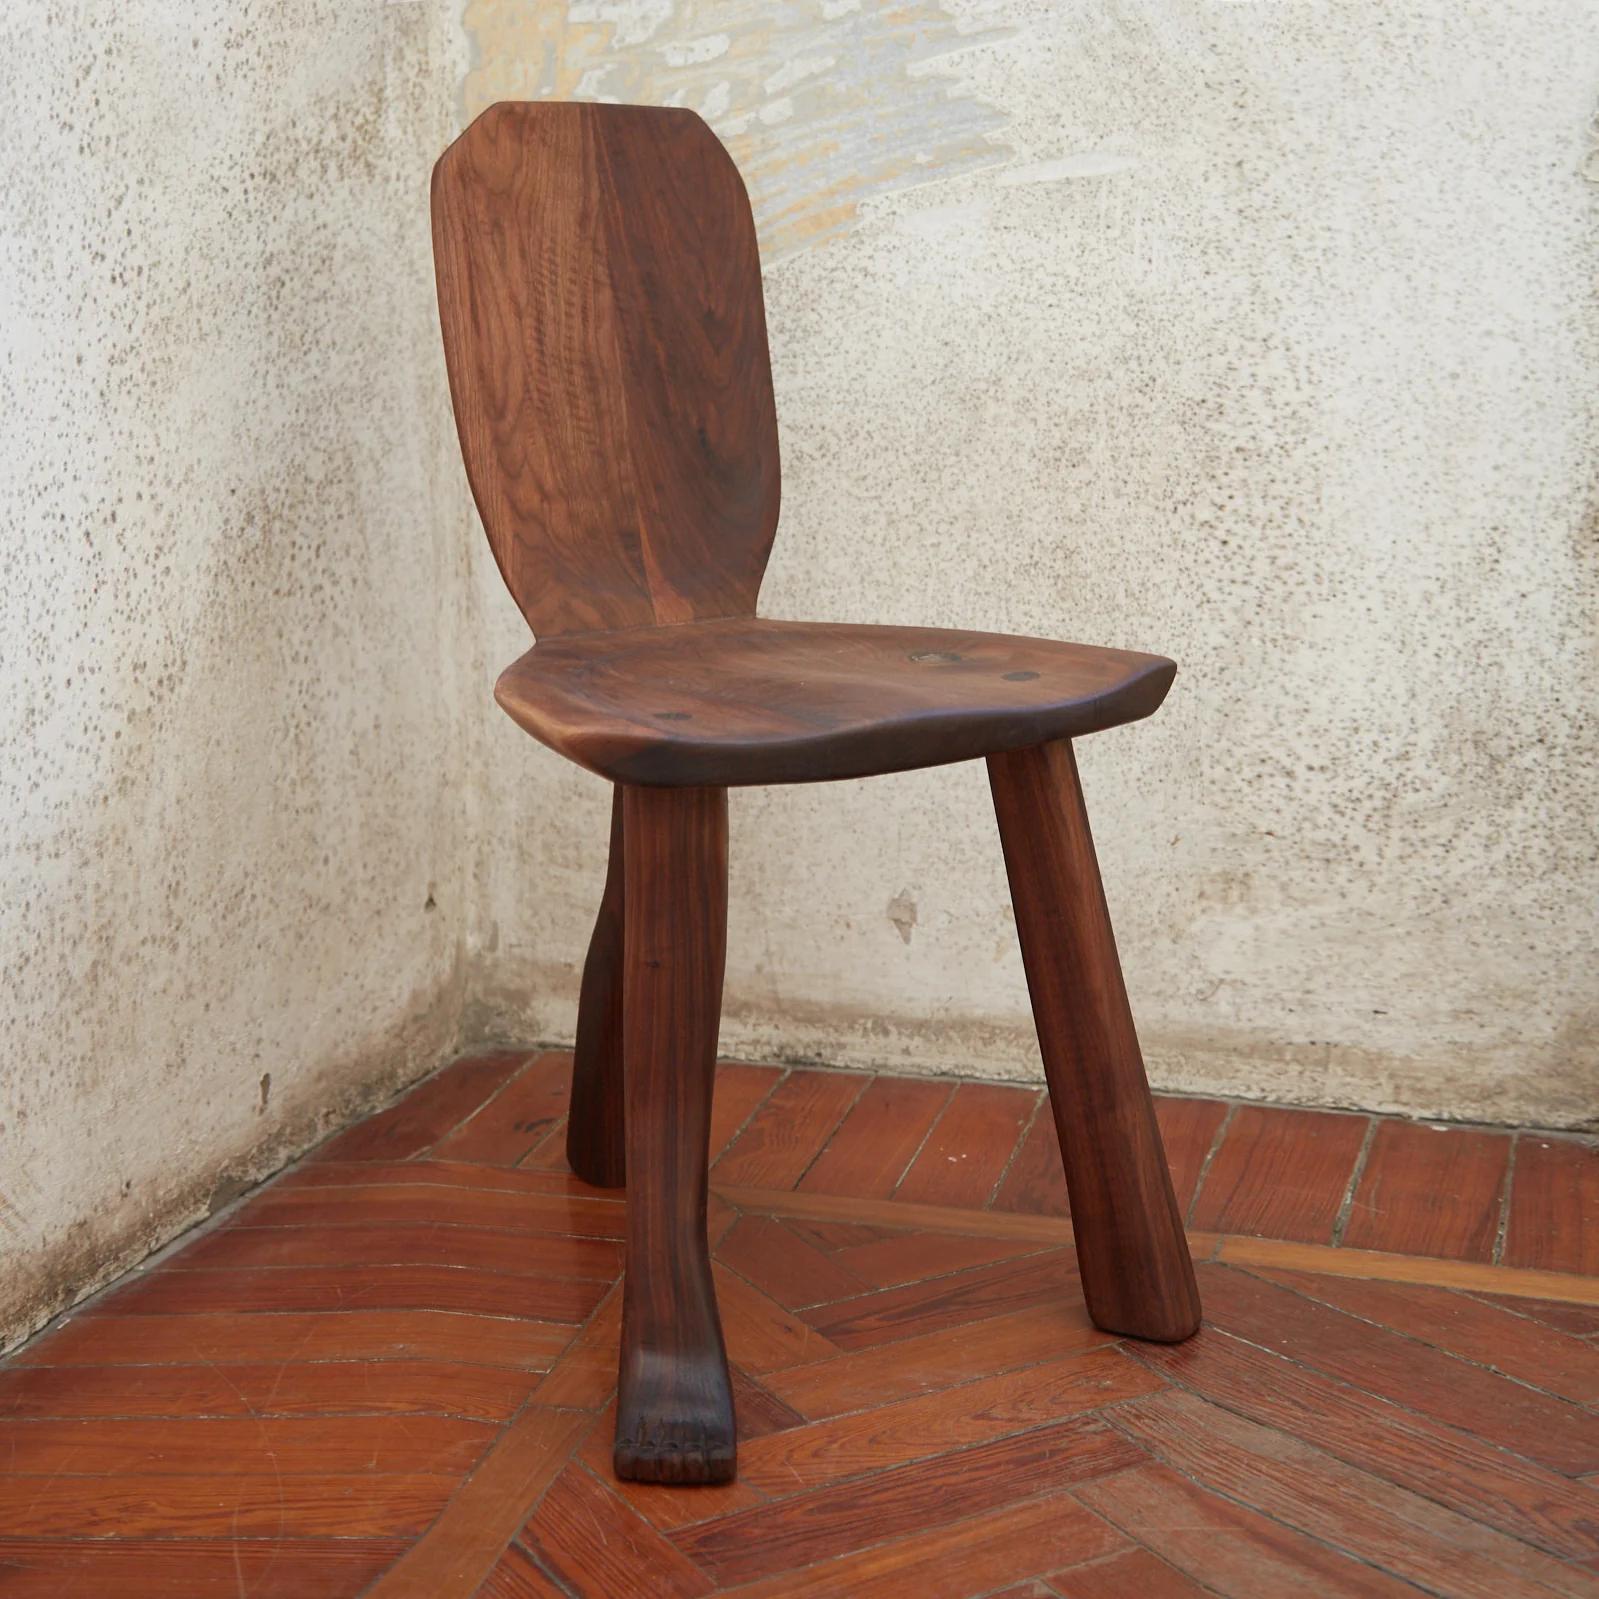 Foot Accent Chair by Project 213A
Dimensions: W 48 x D 35 x H 79 cm
Materials: Walnut

The Foot accent chair is made from Walnut and stands on 3 irregular legs. The wider seat makes this chair a special addition for any room becoming a